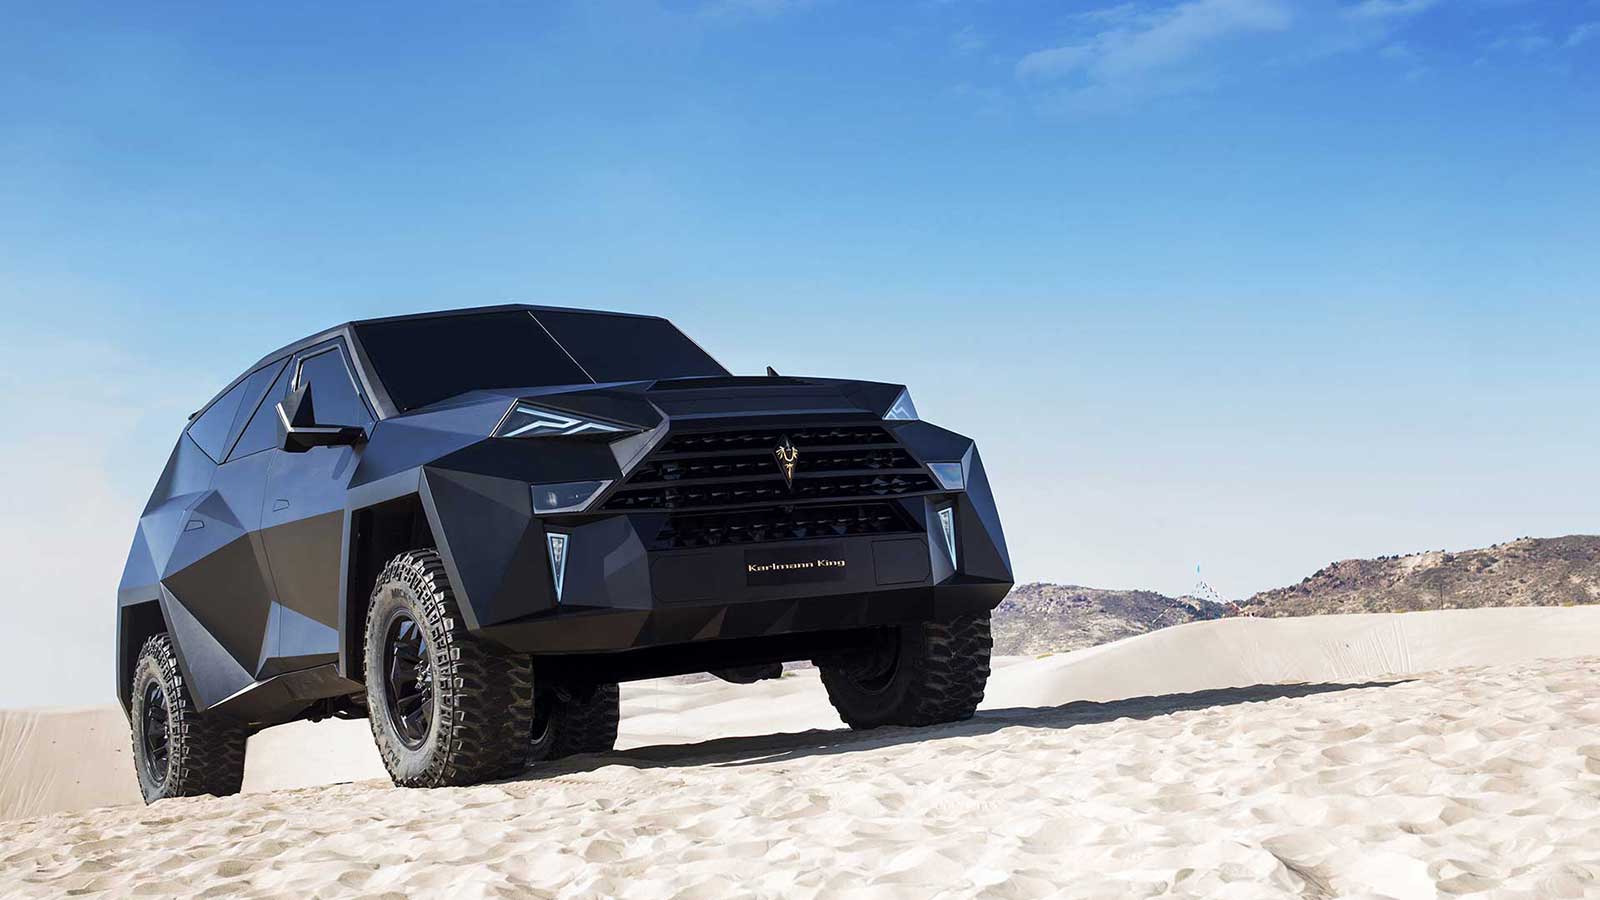 Karlmann King Ground Stealth Fighter Armored Vehicle